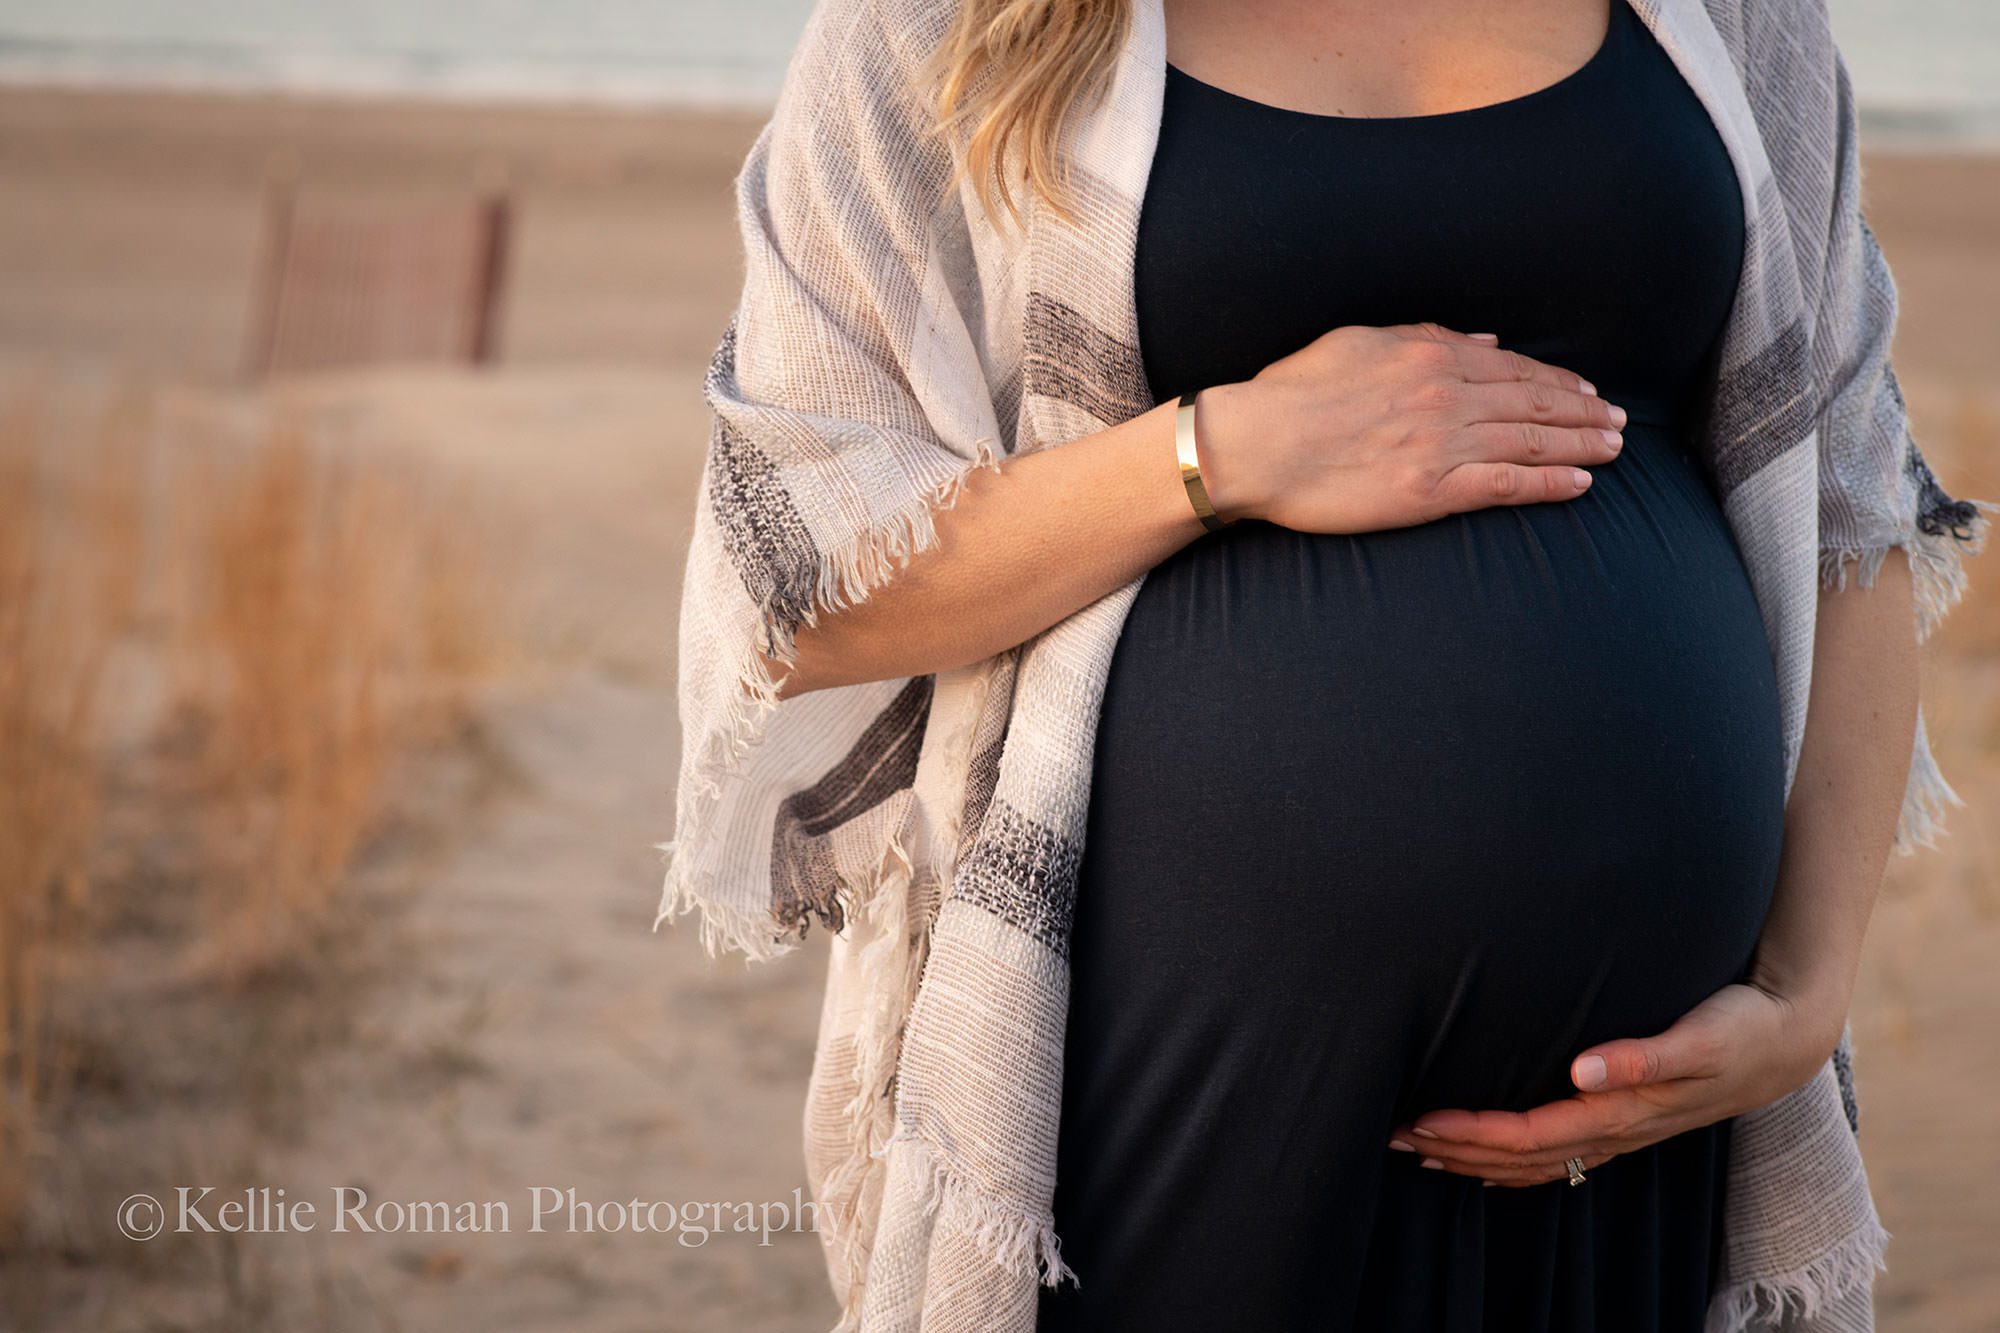 cold night at the beach a women from Illinois on a beach in kenosha who is pregnant holding onto her baby bump. Having her maternity session photographed and wearing a blue dress with sweater over the top sand in the backdrop